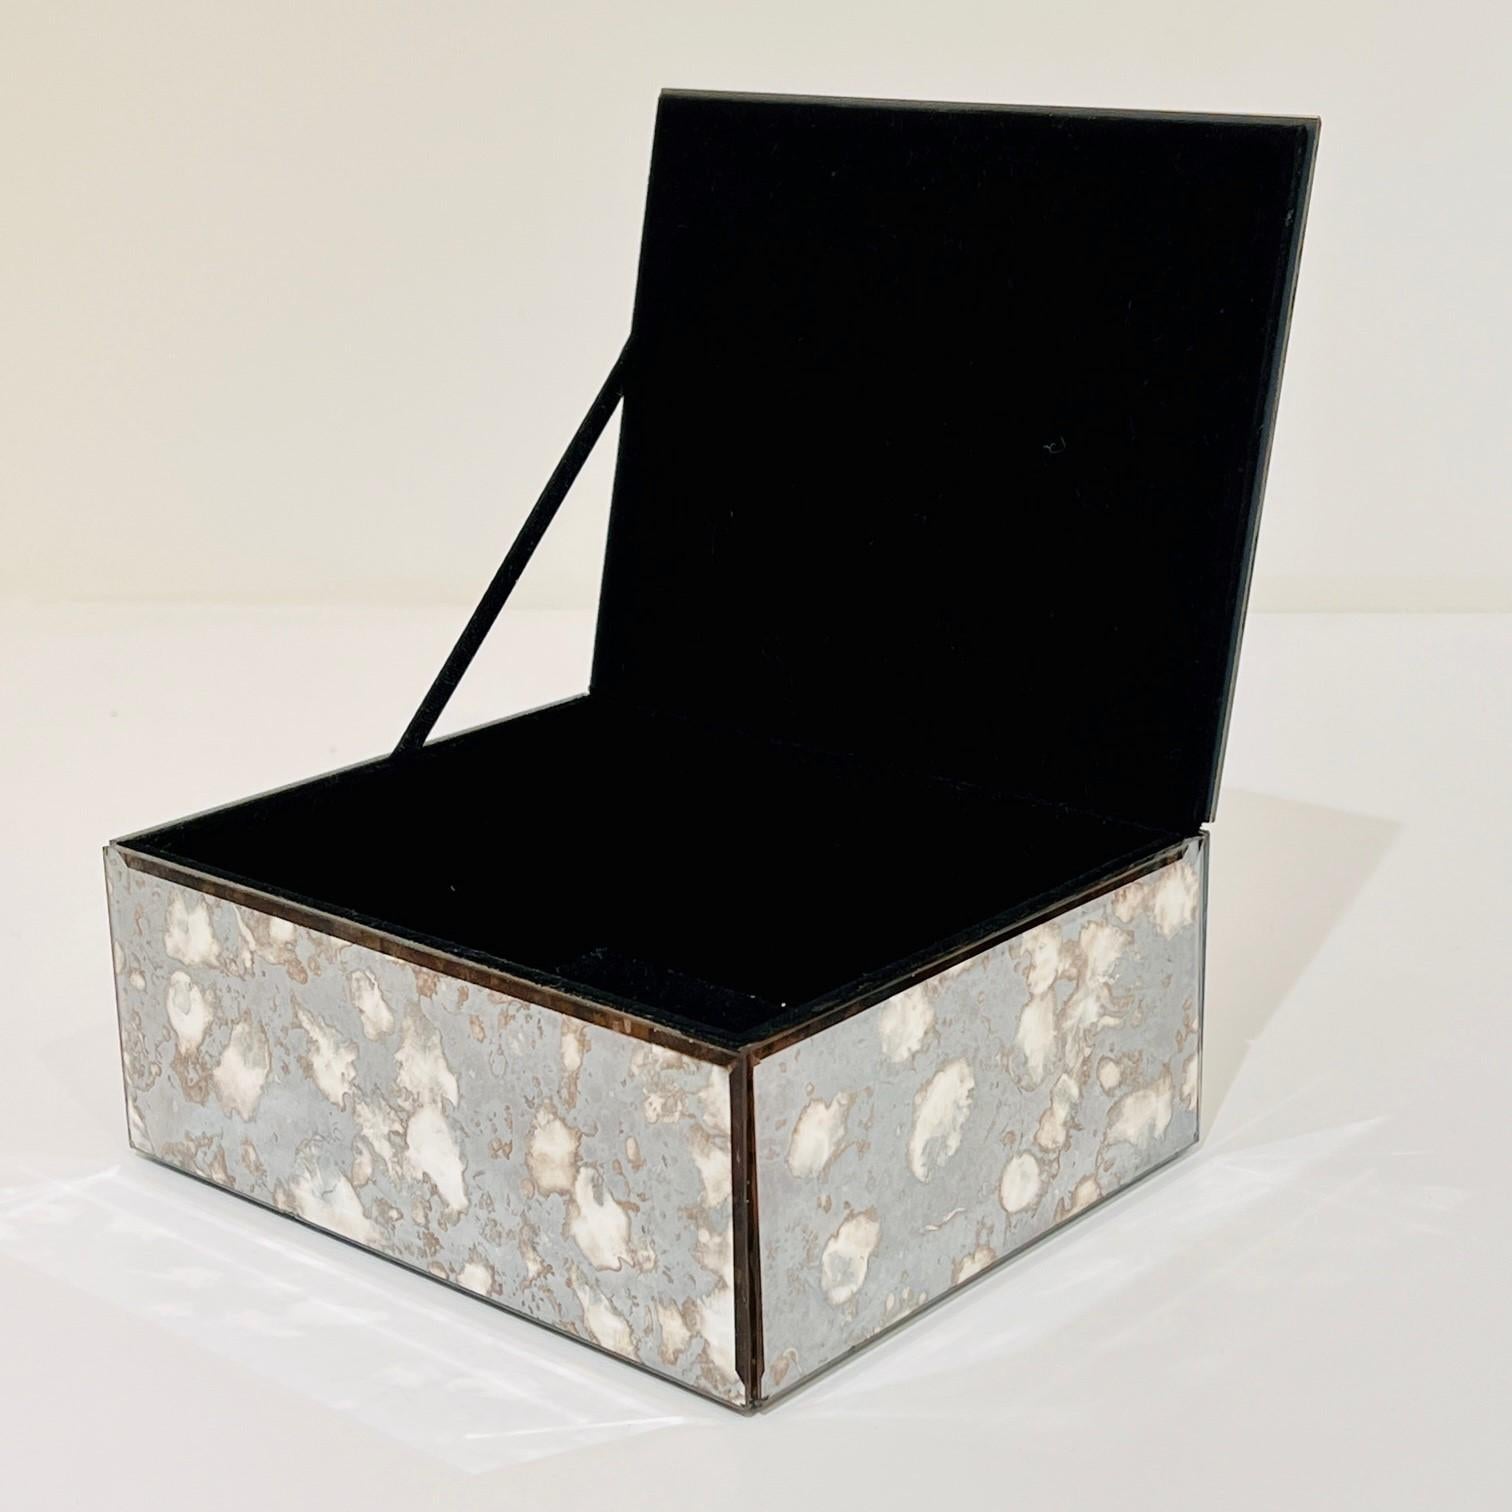 Beveled Mirrored Jewelry Box in Antique Grey and Bronze Glass, c. 1980's For Sale